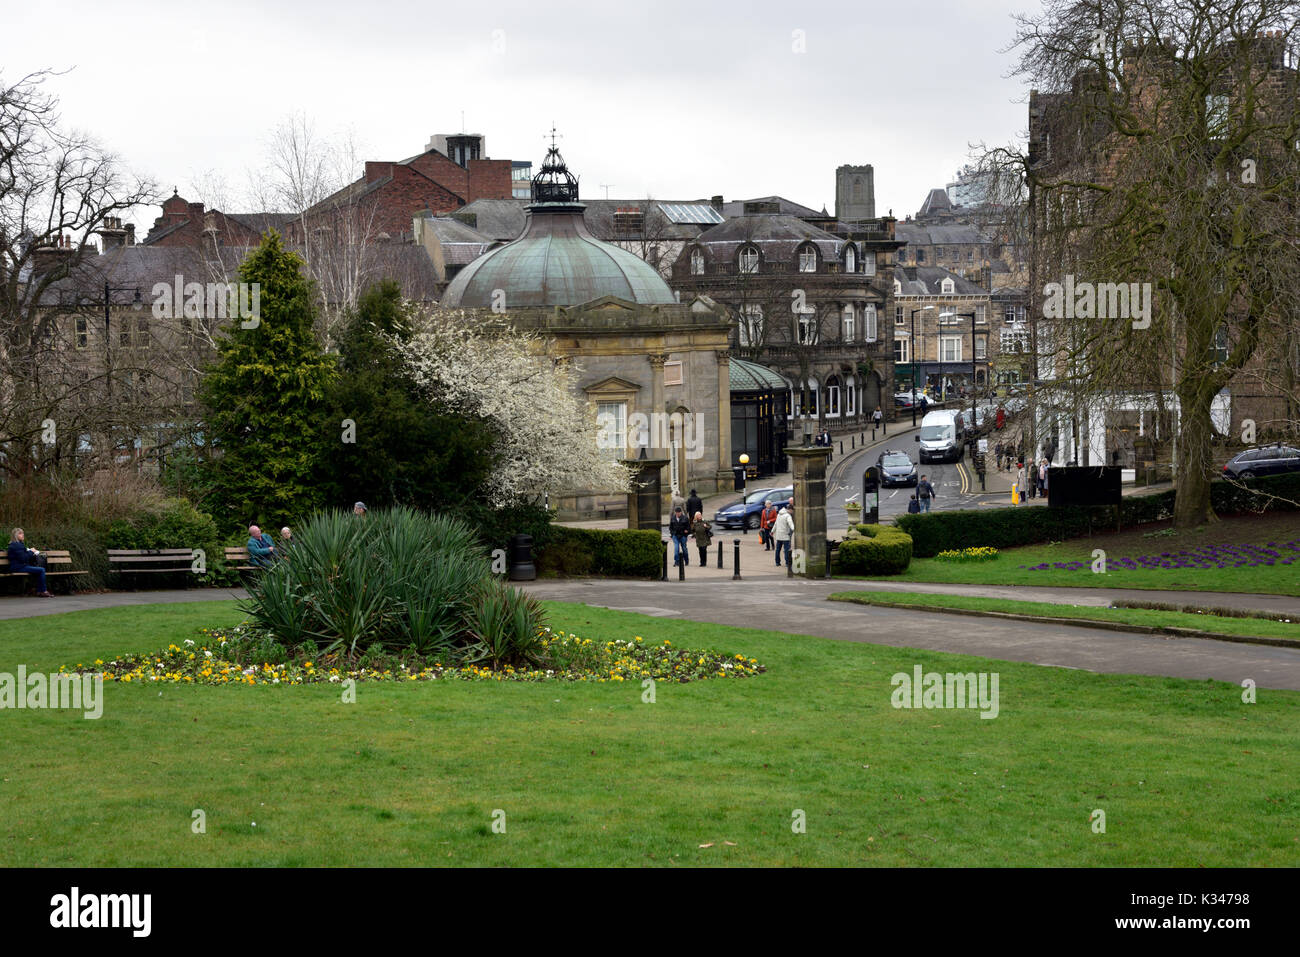 Harrogate, a spar town in North Yorkshire. Stock Photo